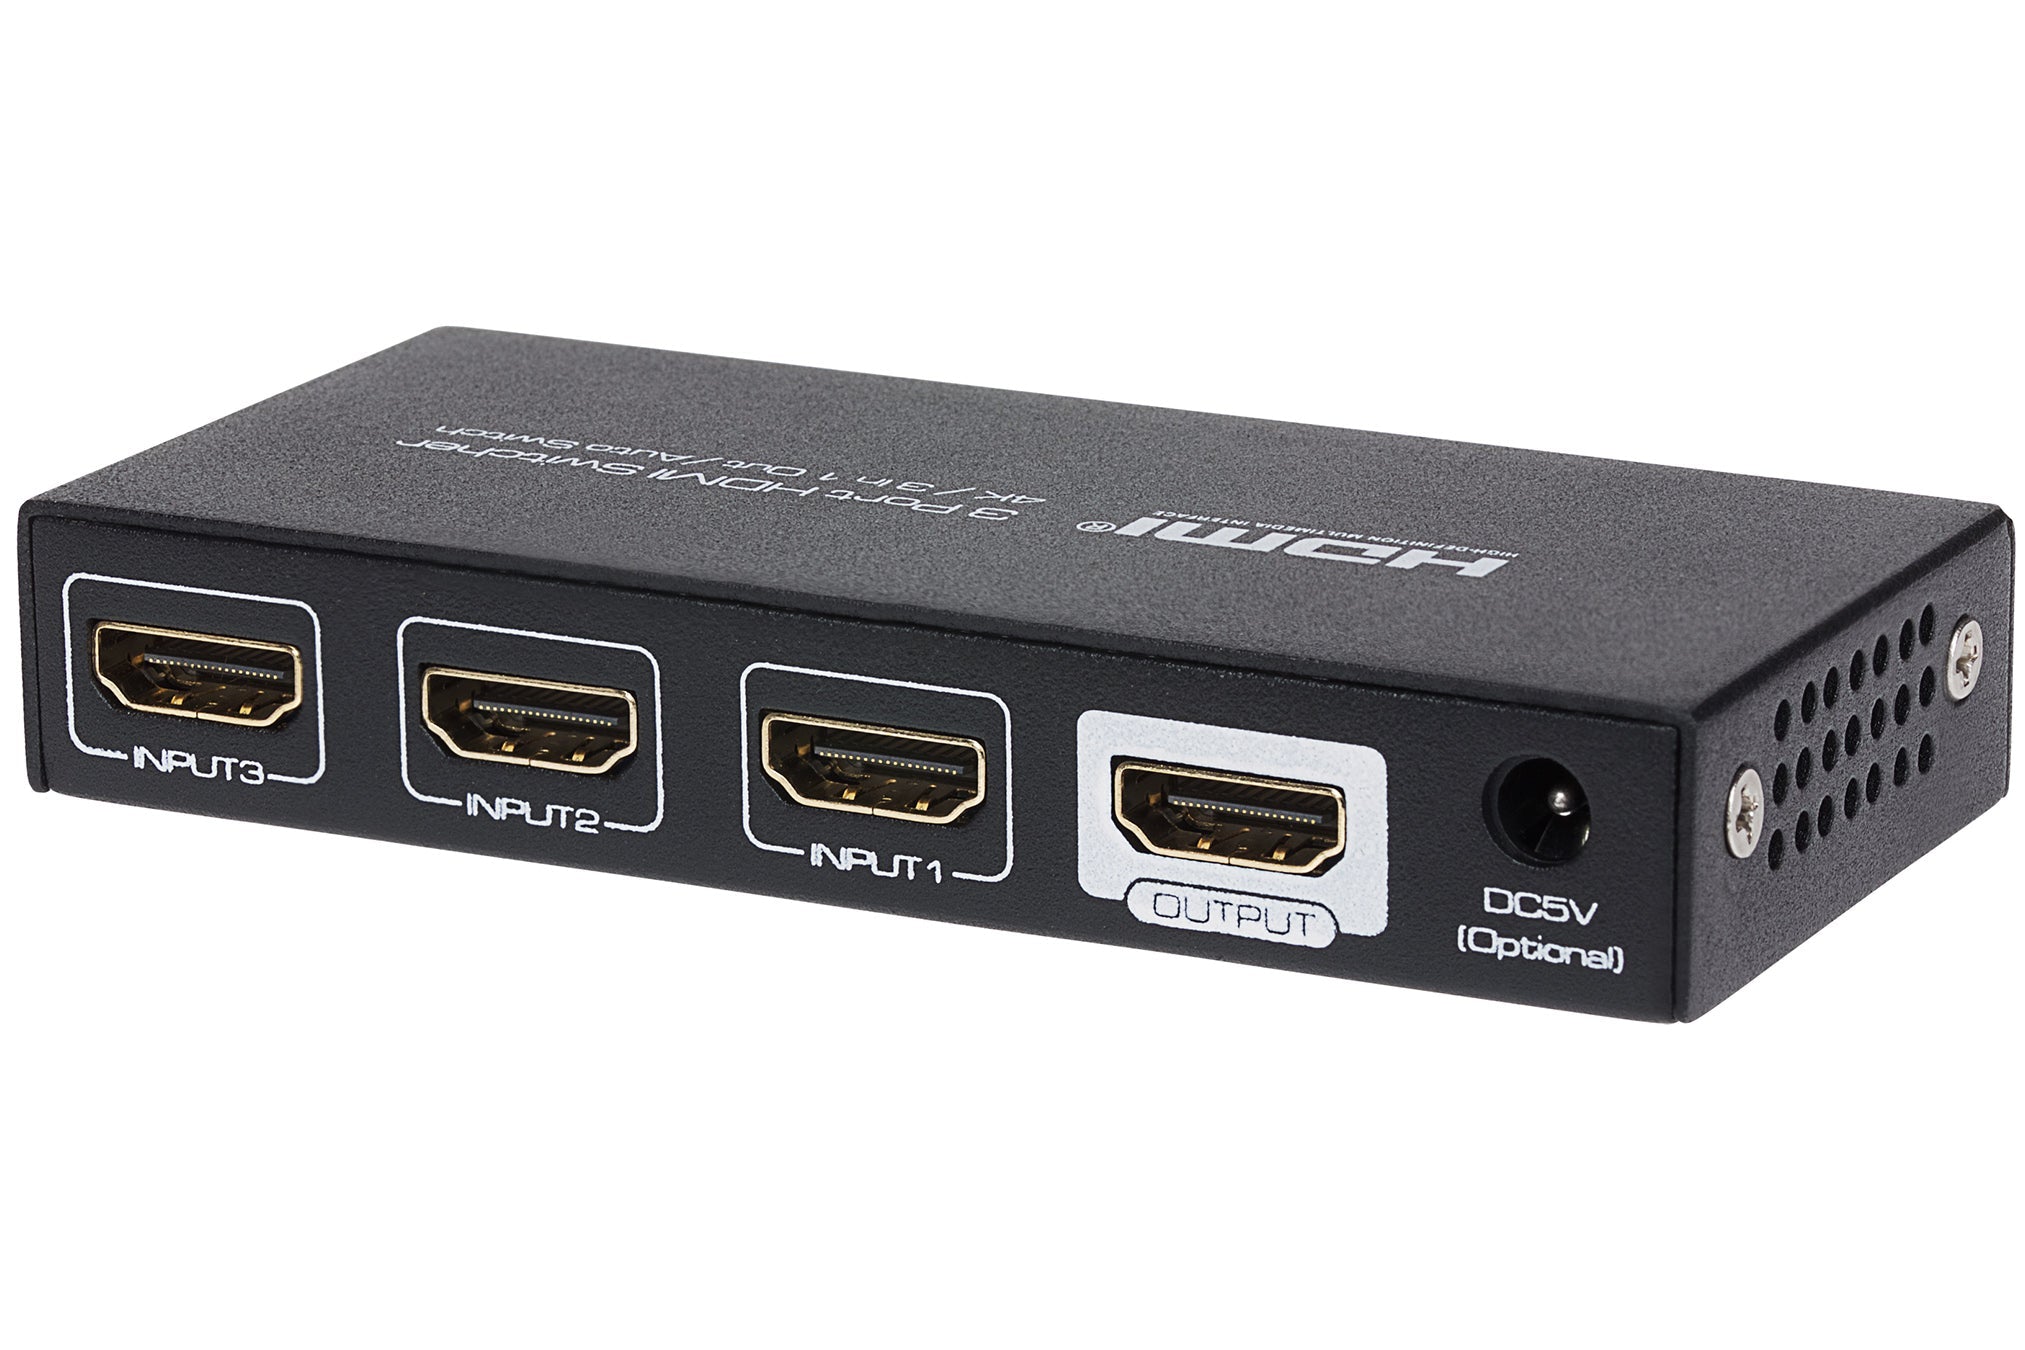 Nikkai HDMI Switch 3 Port In 1 Port Out 4K 30Hz Resolution with Remote Control - Black